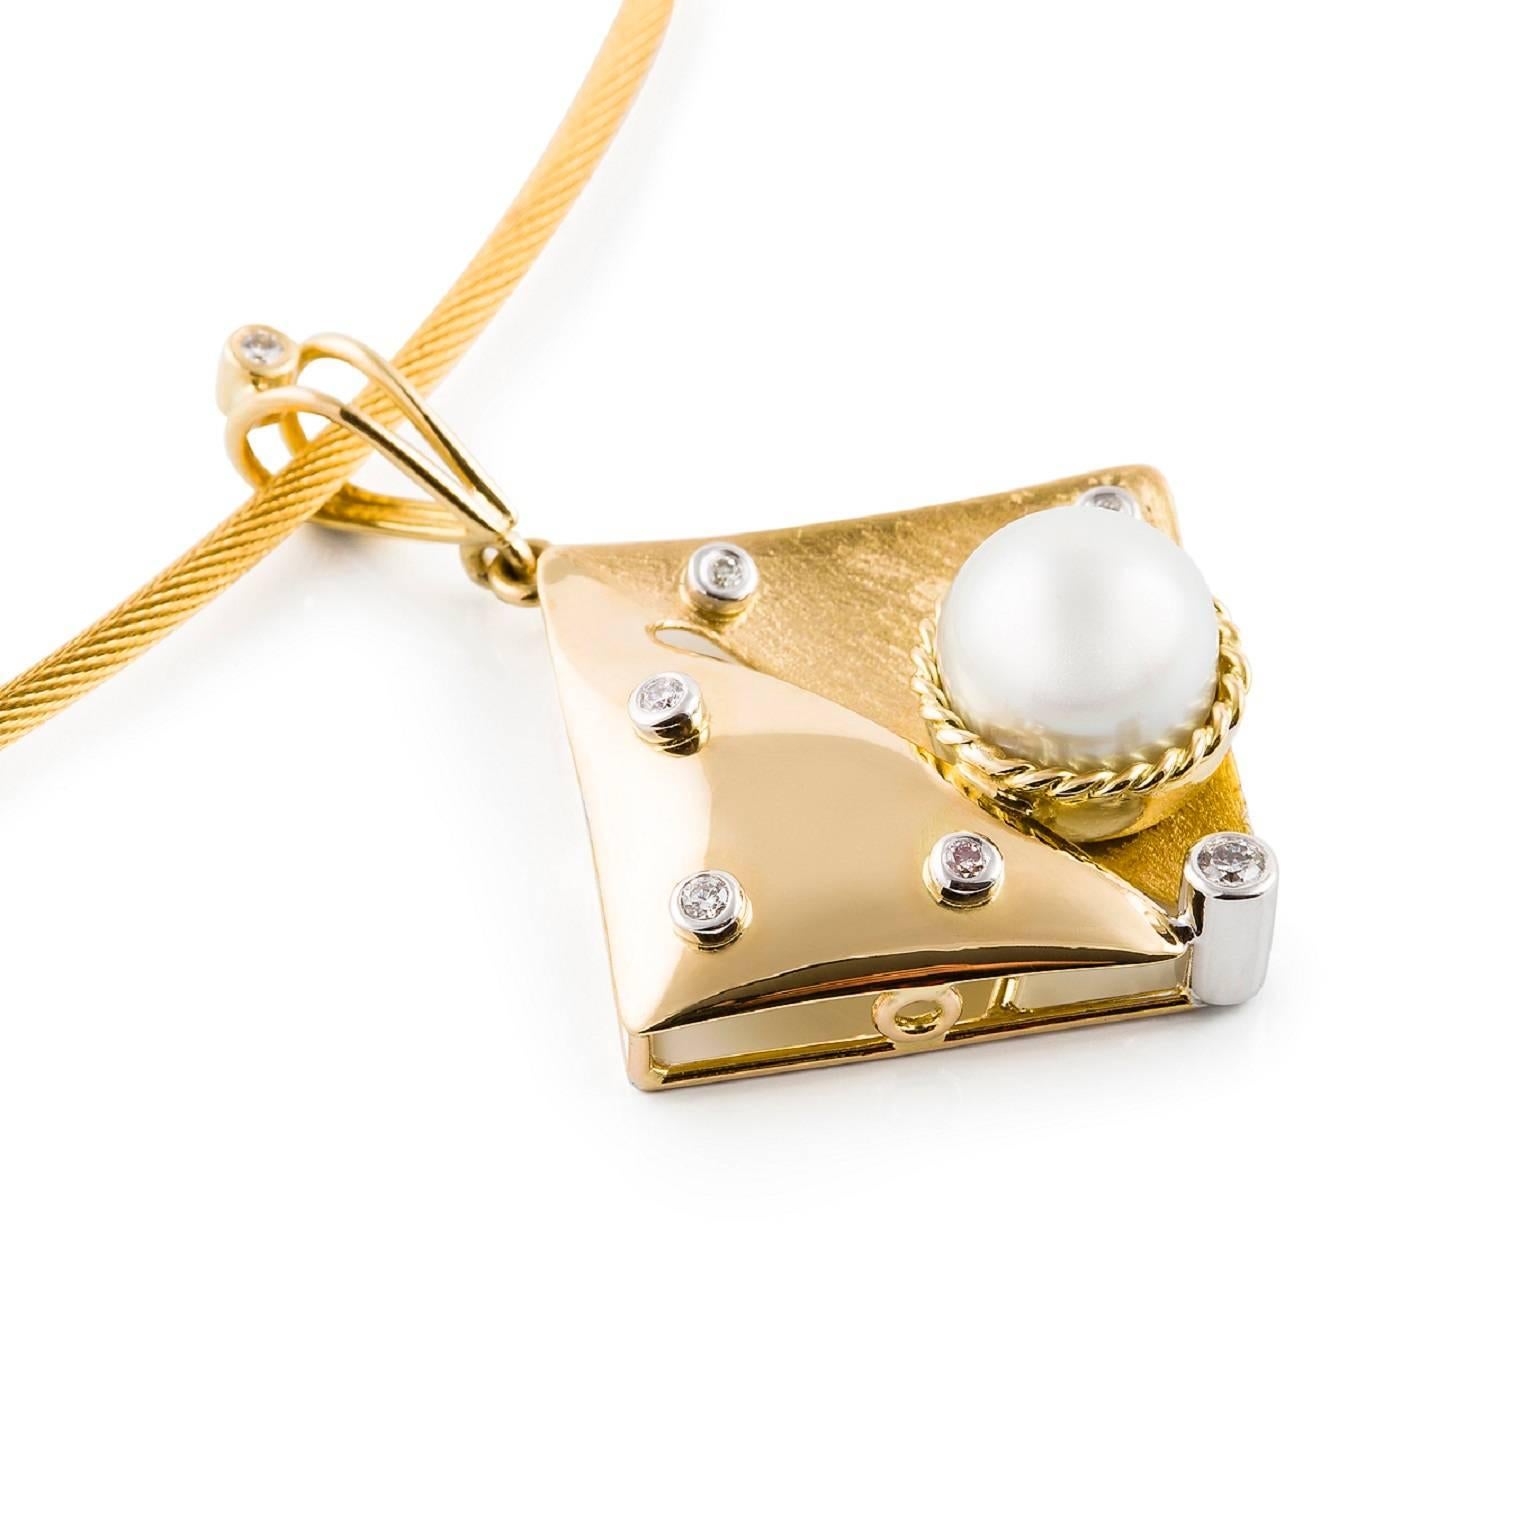 Perla & Diamante Neckpiece

This unique off-set square shaped pendant in 18ct yellow gold is set with a beautiful South Sea pearl and 18ct white gold chenier set diamonds. The delicate open-style bail is complemented with an 18ct white gold chenier